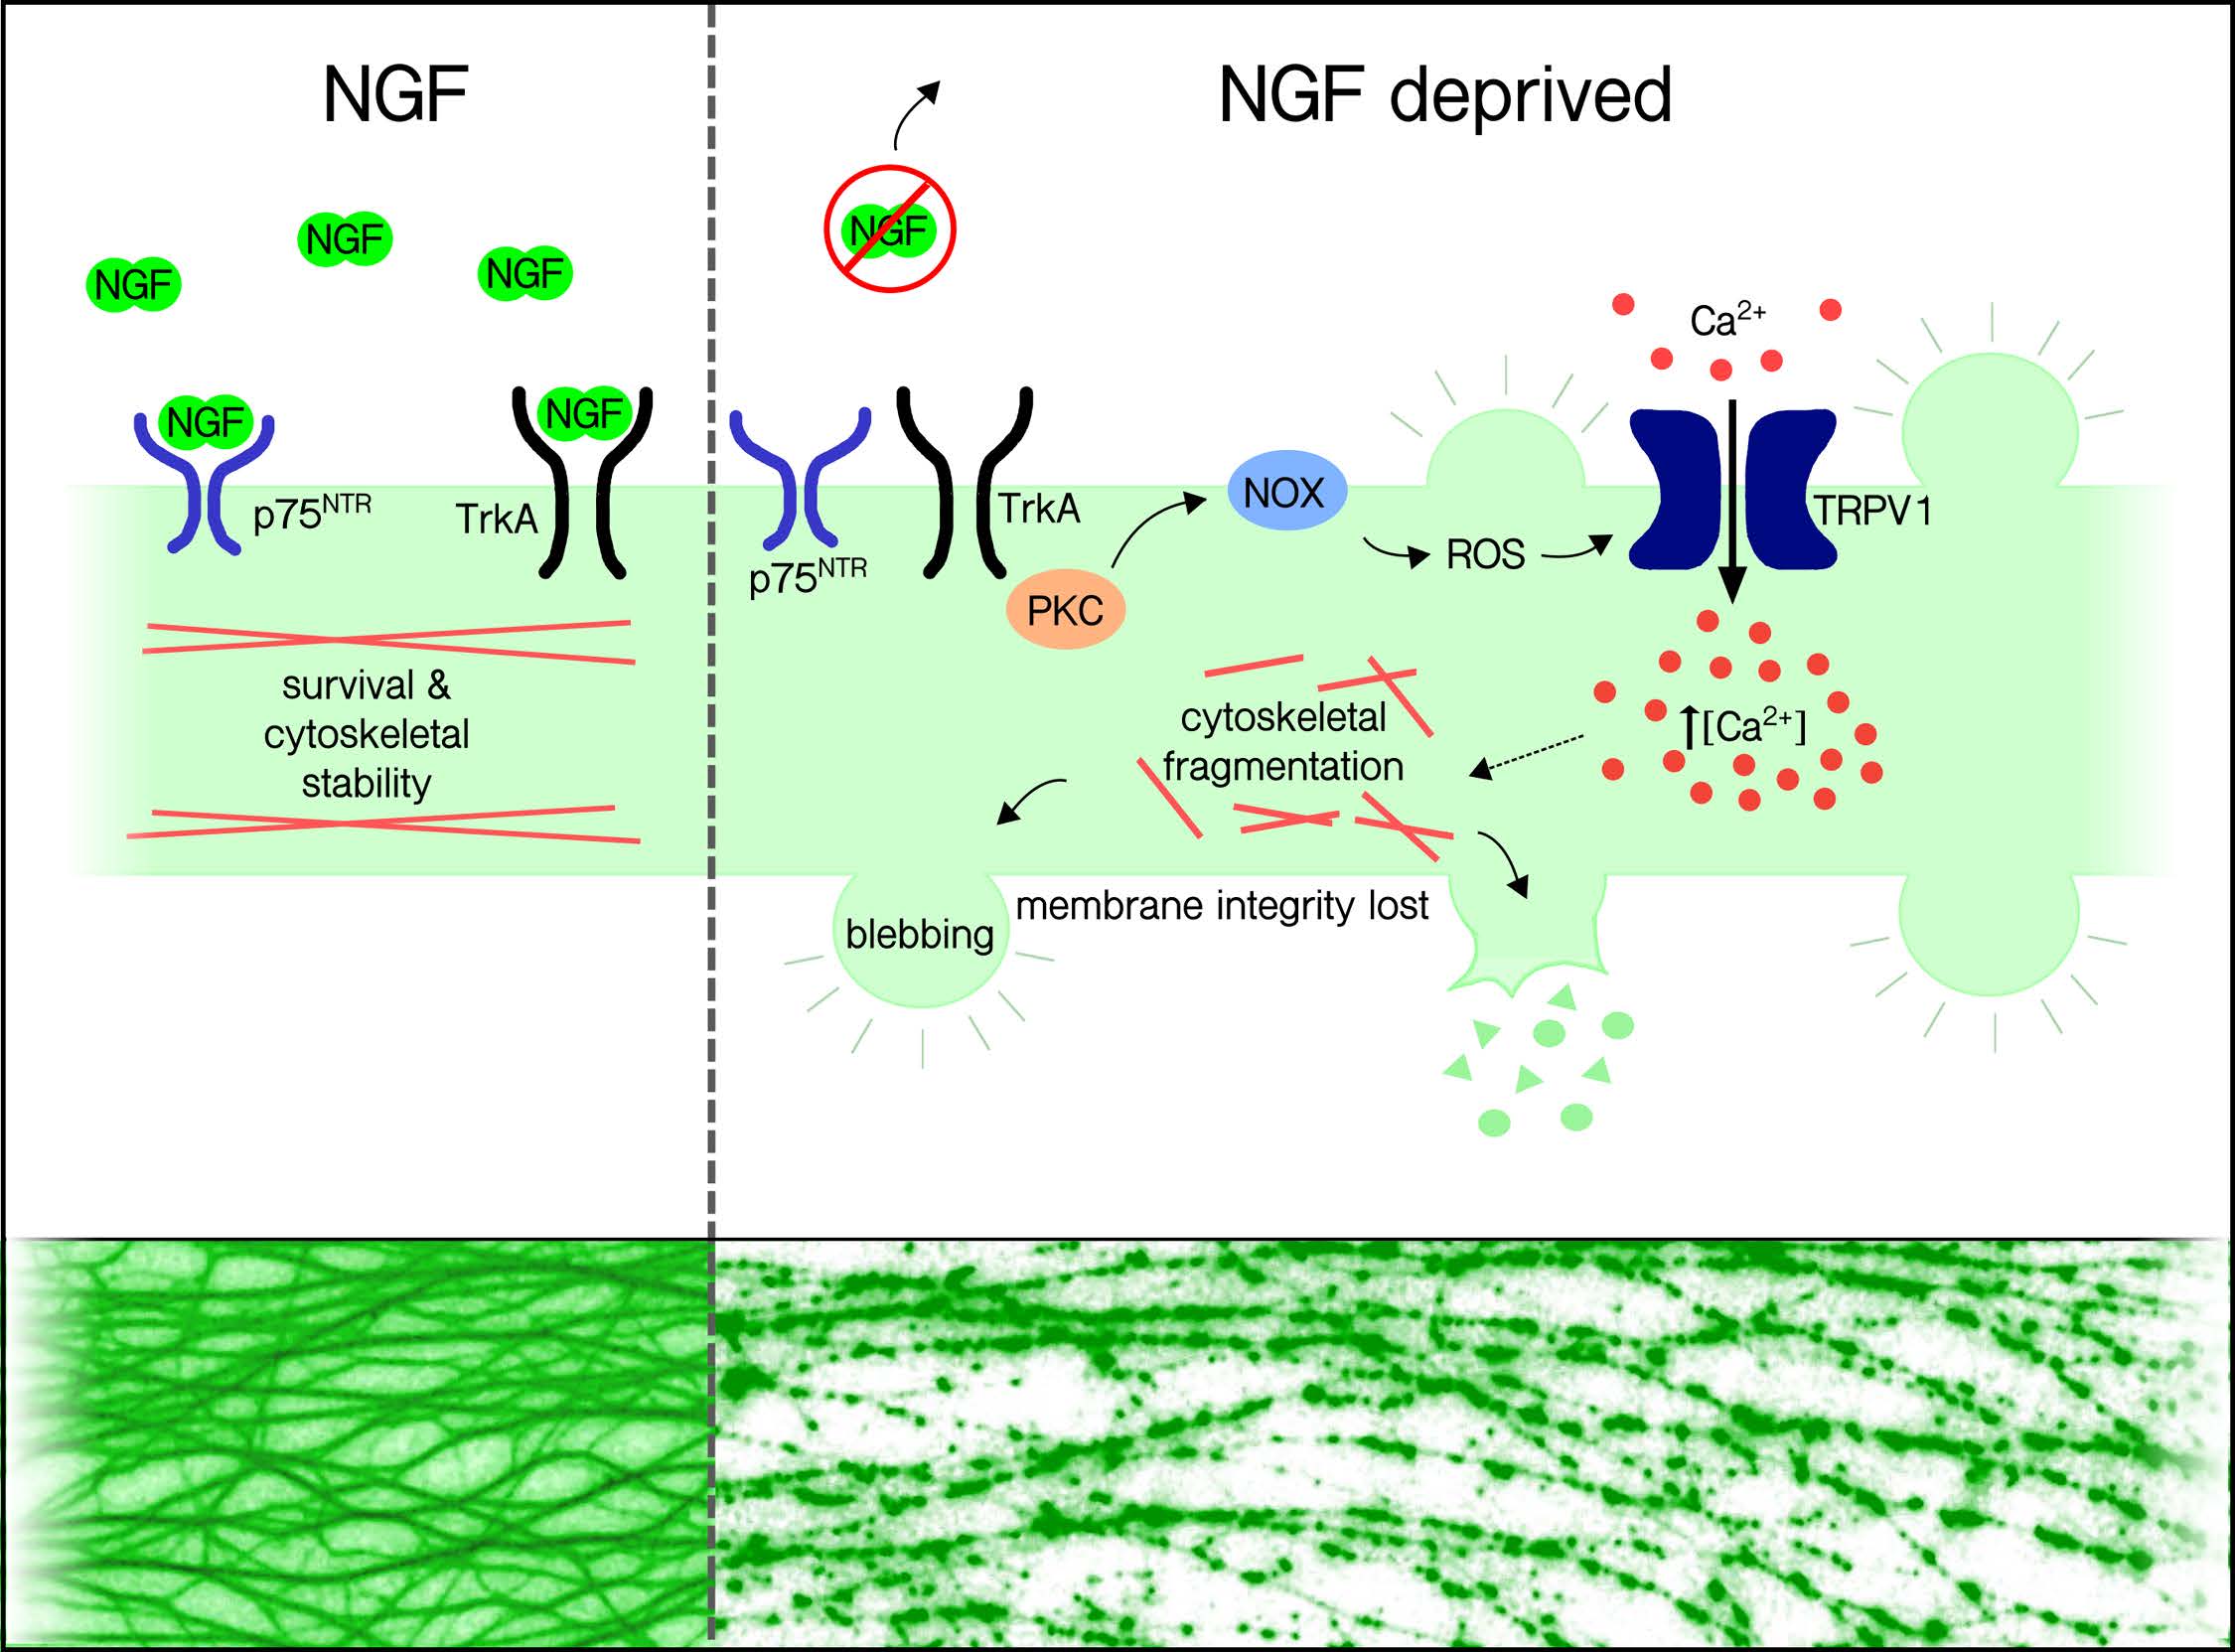 Figure 1. TRPV1 mediates Ca2+ flux and cytoskeletal fragmentation during trophic factor deprivation. TRPV1-mediated Ca2+ flux is prompted by a signaling axis comprised of PKC-dependent NOX complex activation and ROS generation upstream of TRPV1 (Visual abstract from Johnstone et al. 2019). 